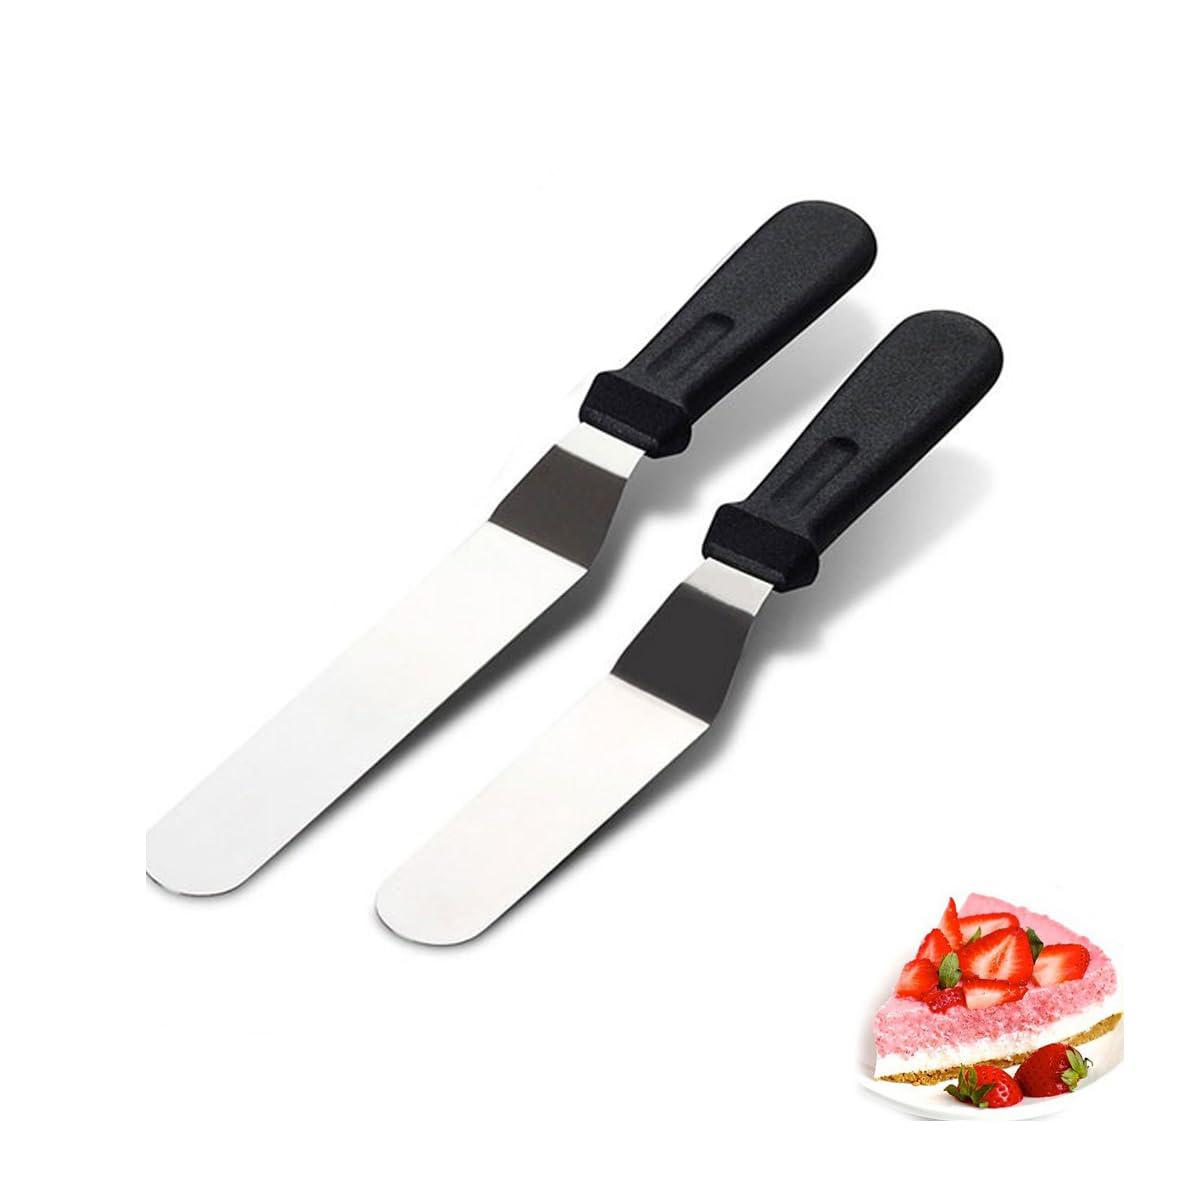 gzlt angled icing spatulas, small offset spatulas for baking,set of 2  stainless steel cake spatulas,frosting spatula